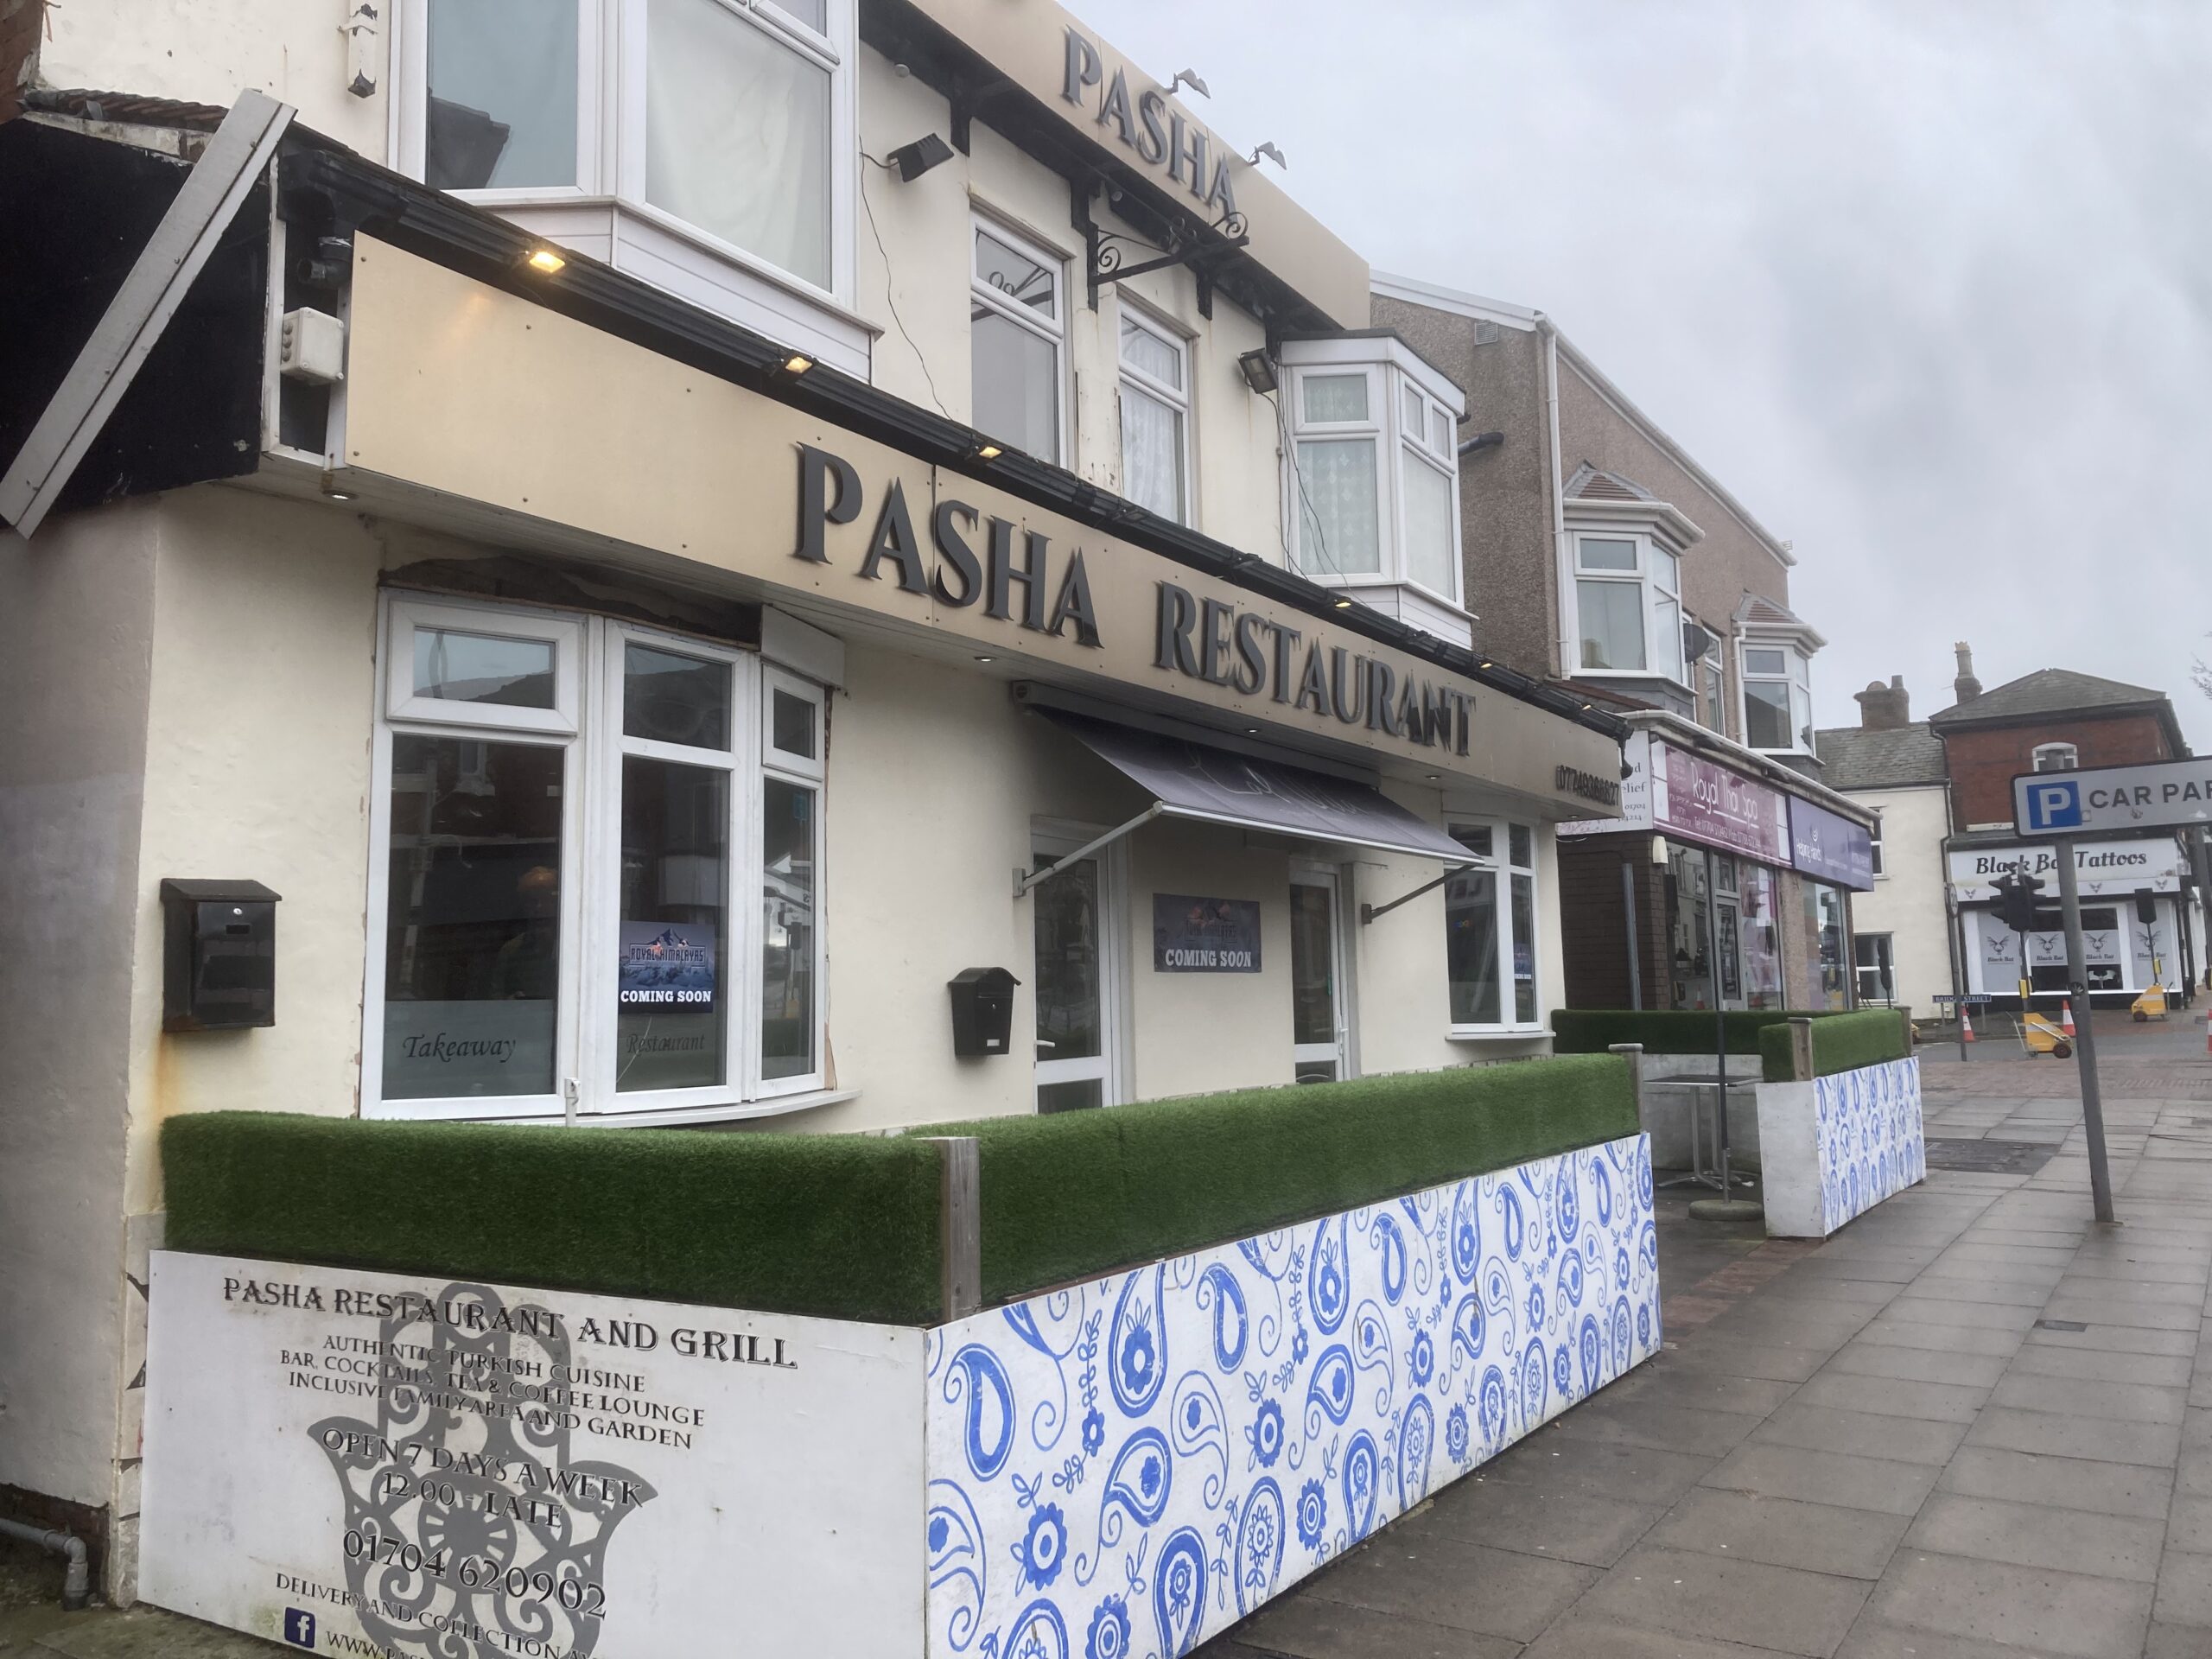 The former Pasha restaurant on Eastbank Street in Southport town centre. Phoot by Andrew Brown Stand Up For Southport